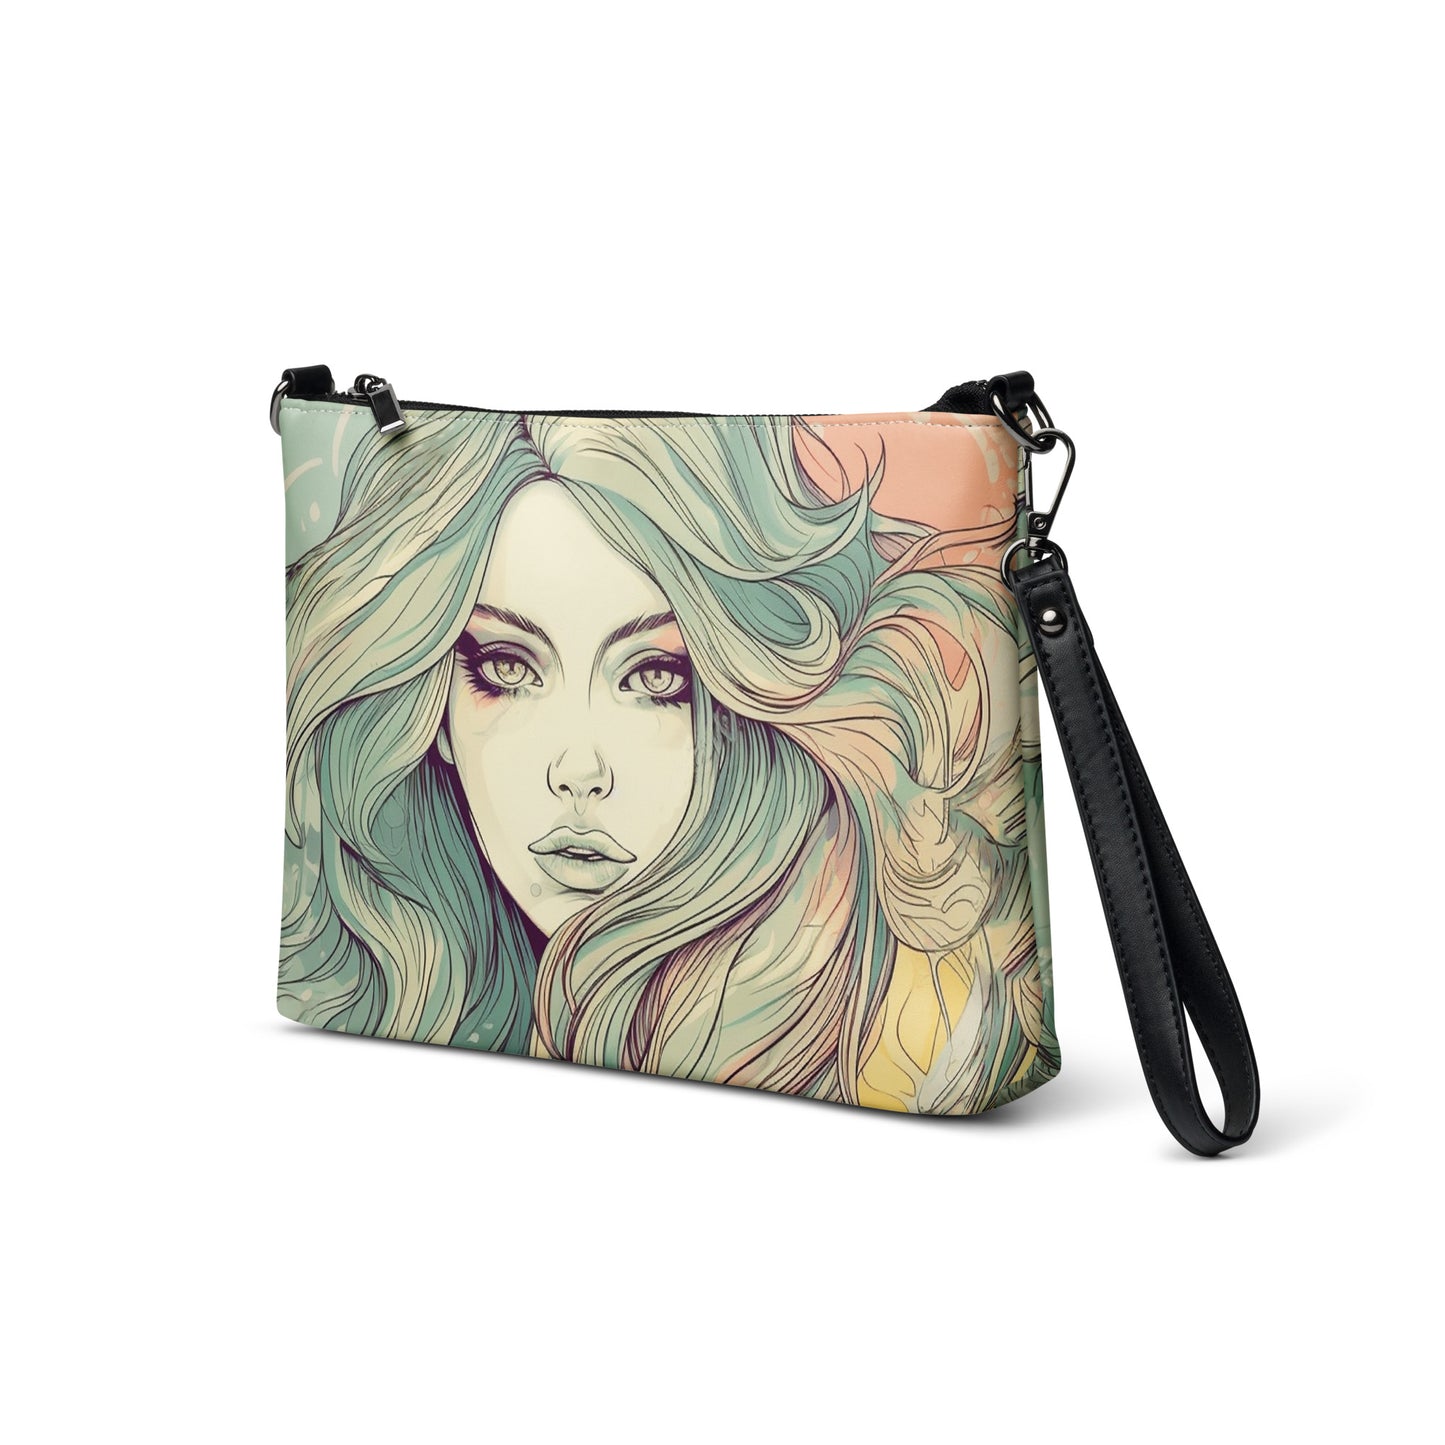 GROOVY 70s GIRL CROSSOVER/Clutch BAG